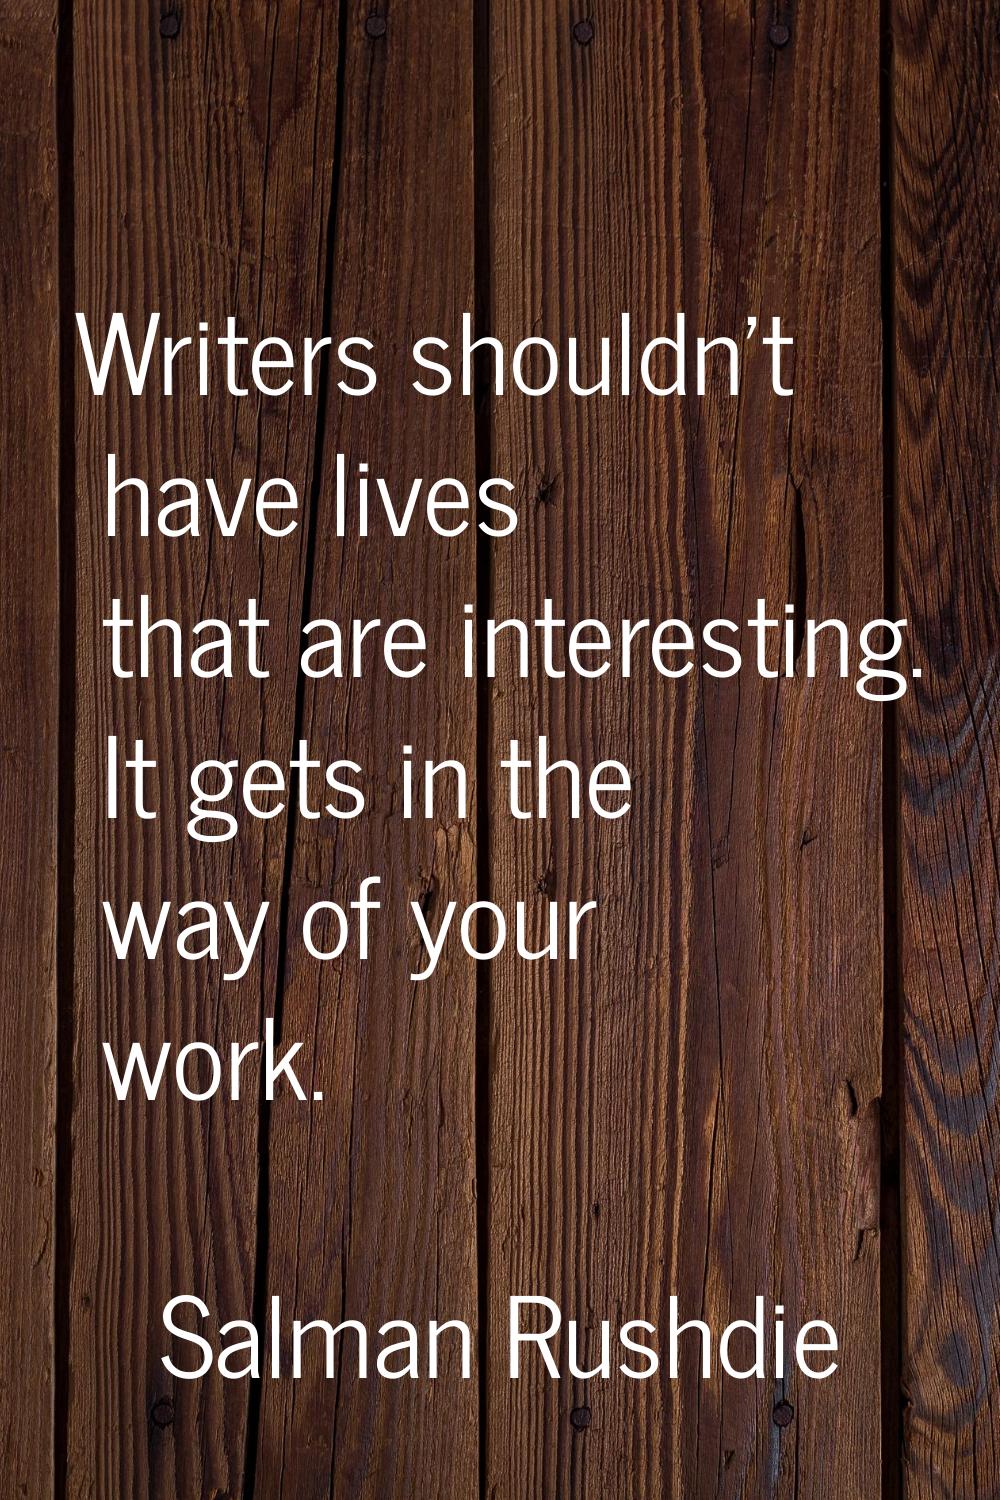 Writers shouldn't have lives that are interesting. It gets in the way of your work.